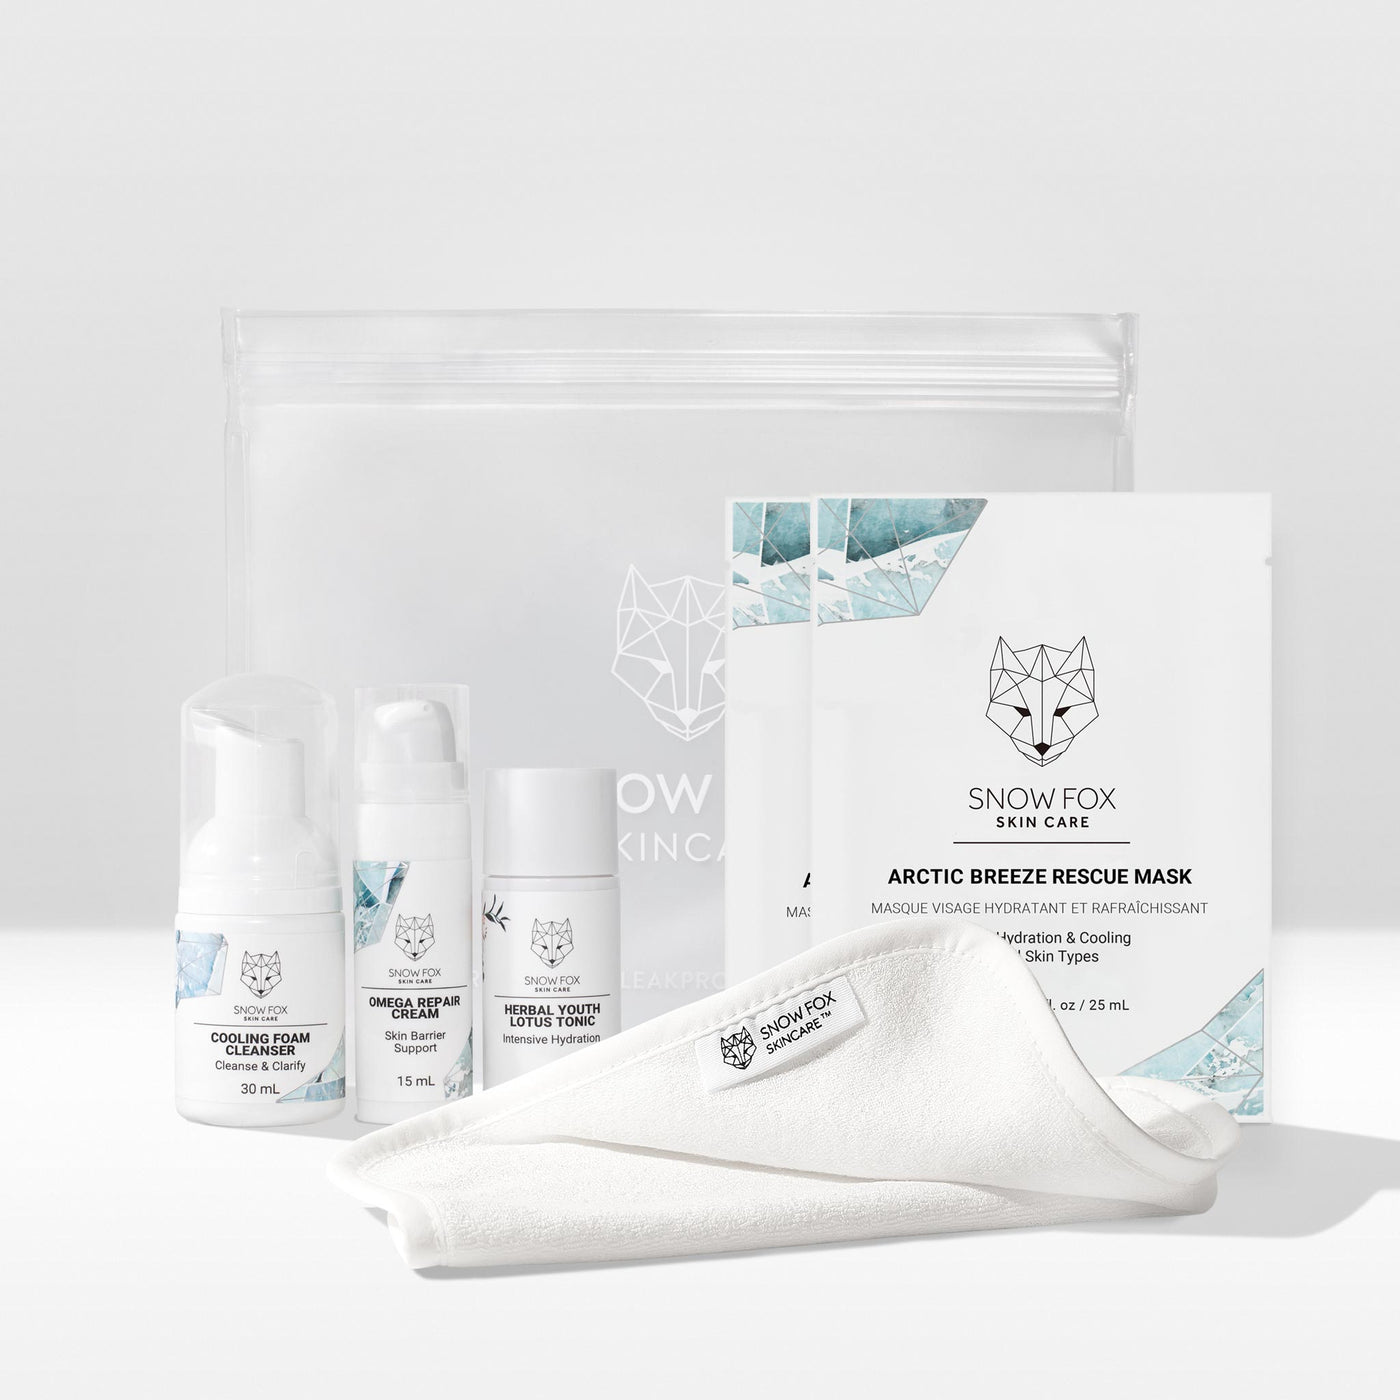 Cooling Foam Cleanser — 30 mL  Arctic Breeze Rescue Mask — 2 sheets  Herbal Youth Lotus Tonic — 30 mL  Omega Repair Cream — 15 mL Organic Cotton &amp; Bamboo Facial Cloth — 1 cloth Leakproof, Water Resistant, Resealable Travel Pouch — 1 bag